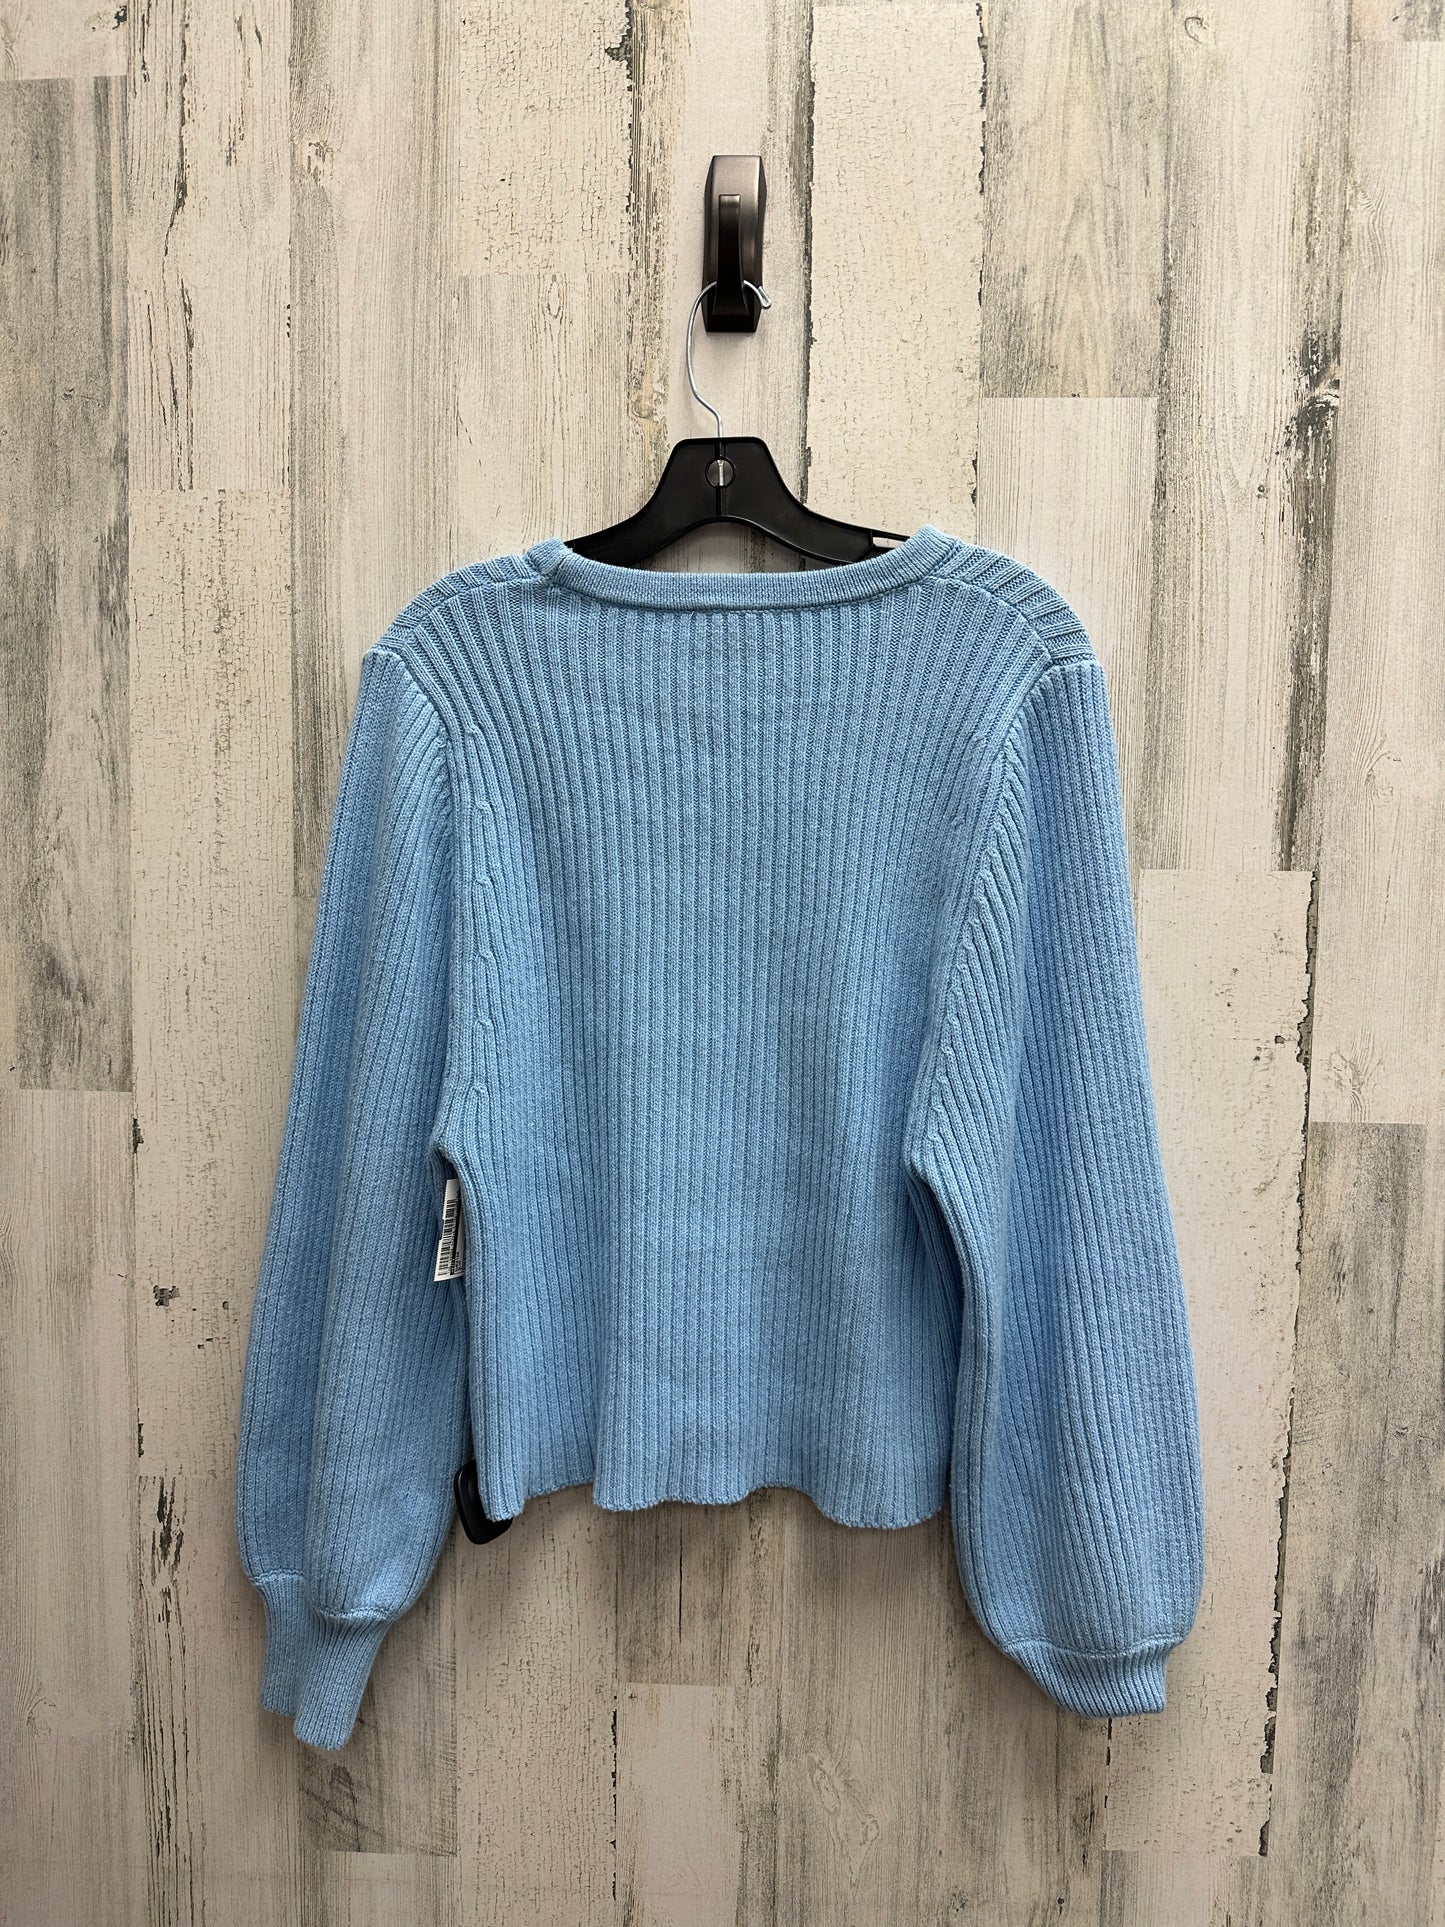 Sweater By Vici  Size: S